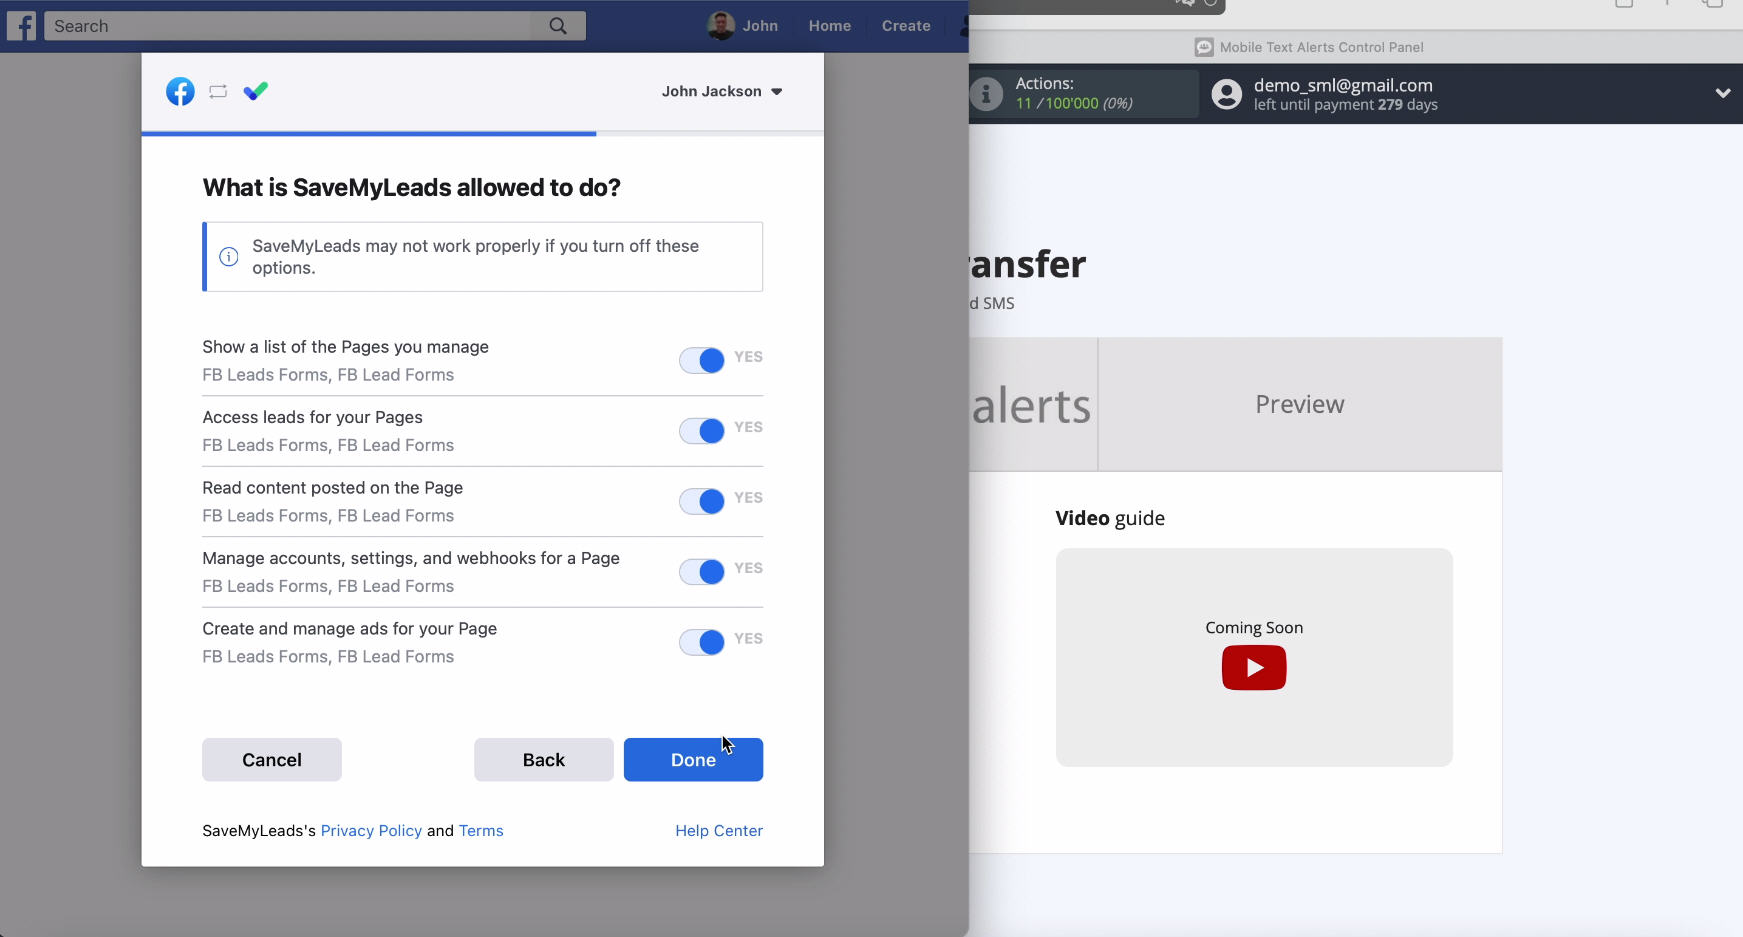 Facebook and Mobile Text Alerts integration | Access settings